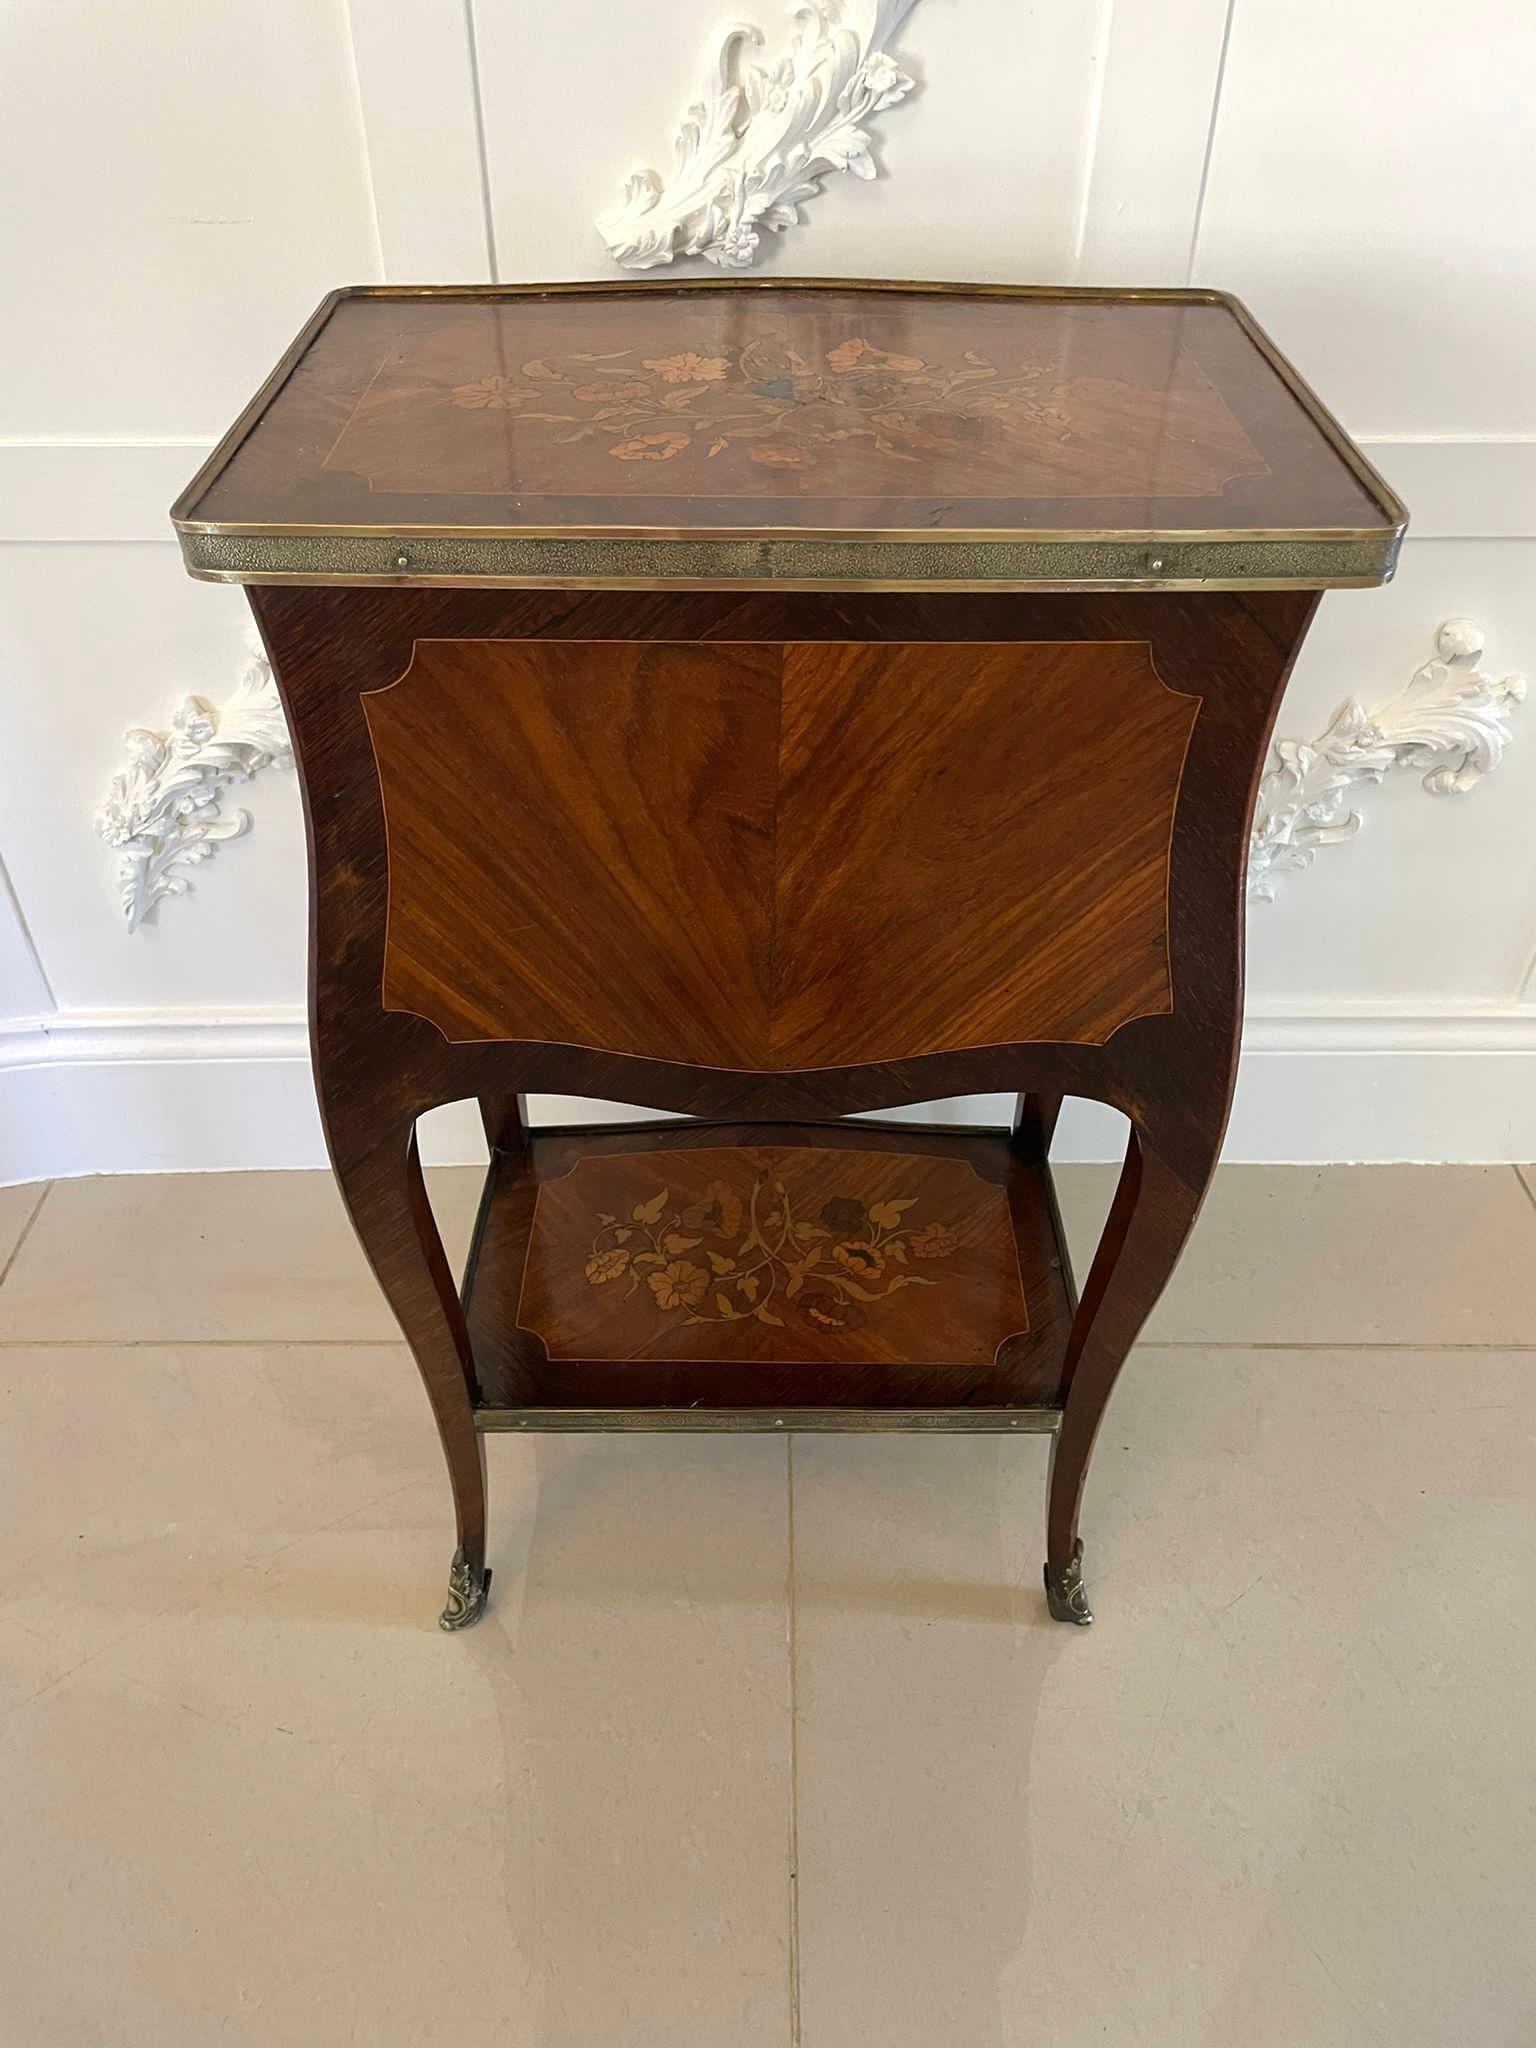 Antique Freestanding Quality Marquetry Inlaid Kingwood Chest of Drawers In Good Condition For Sale In Suffolk, GB